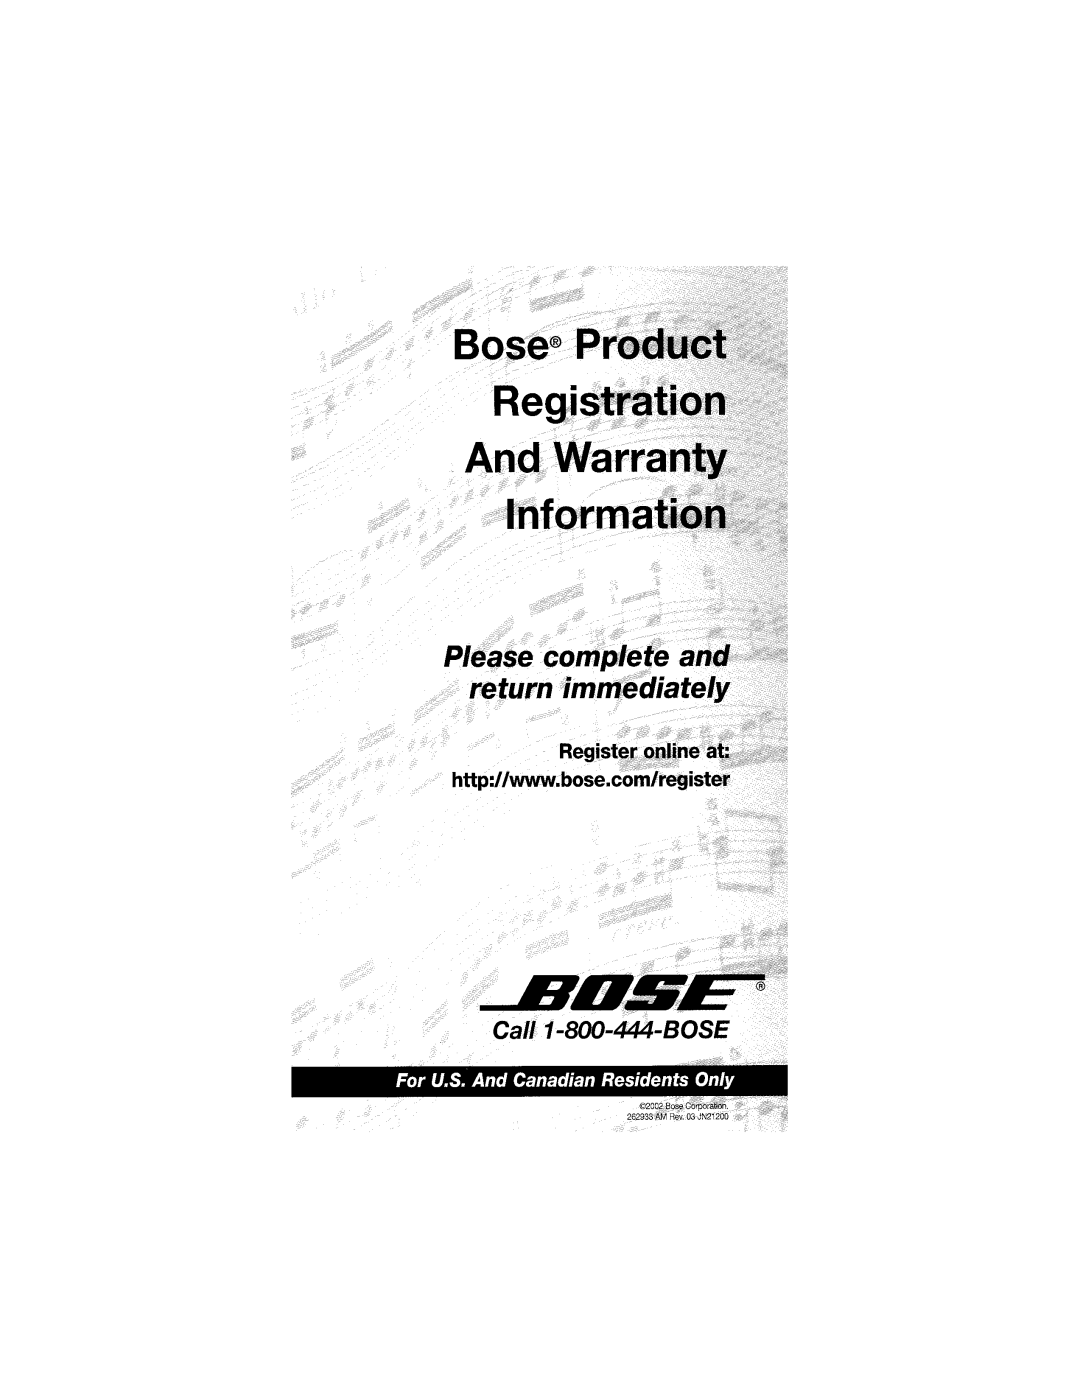 Bose SA-3 manual For U.S. And Canadian Residents Only 